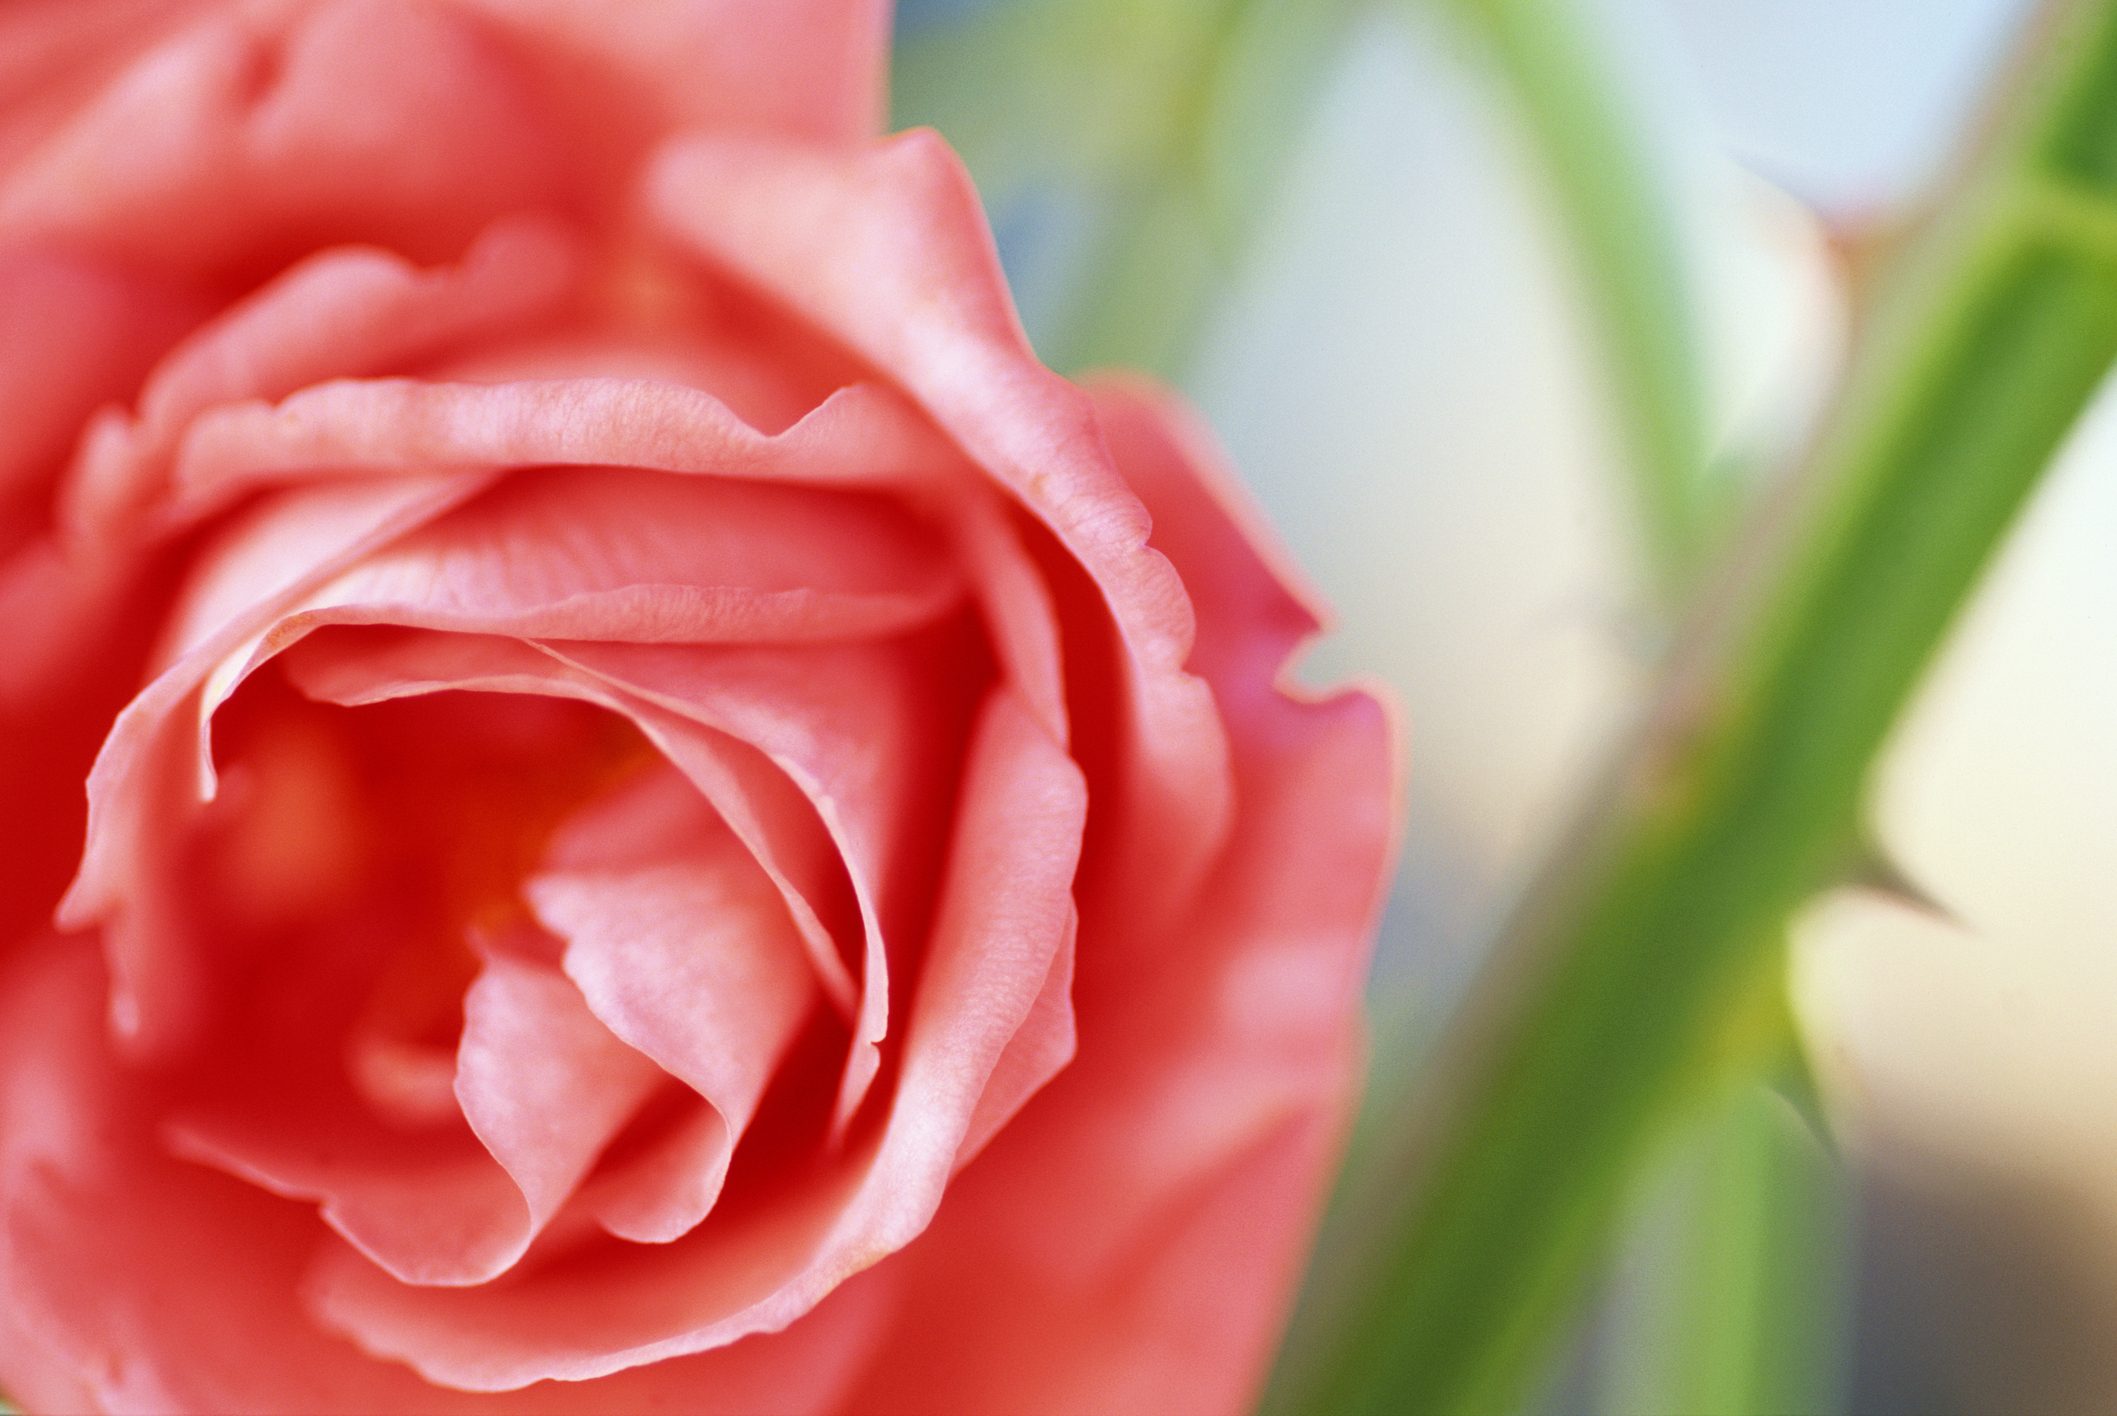 Why Do Roses Have Thorns (and Hips)?